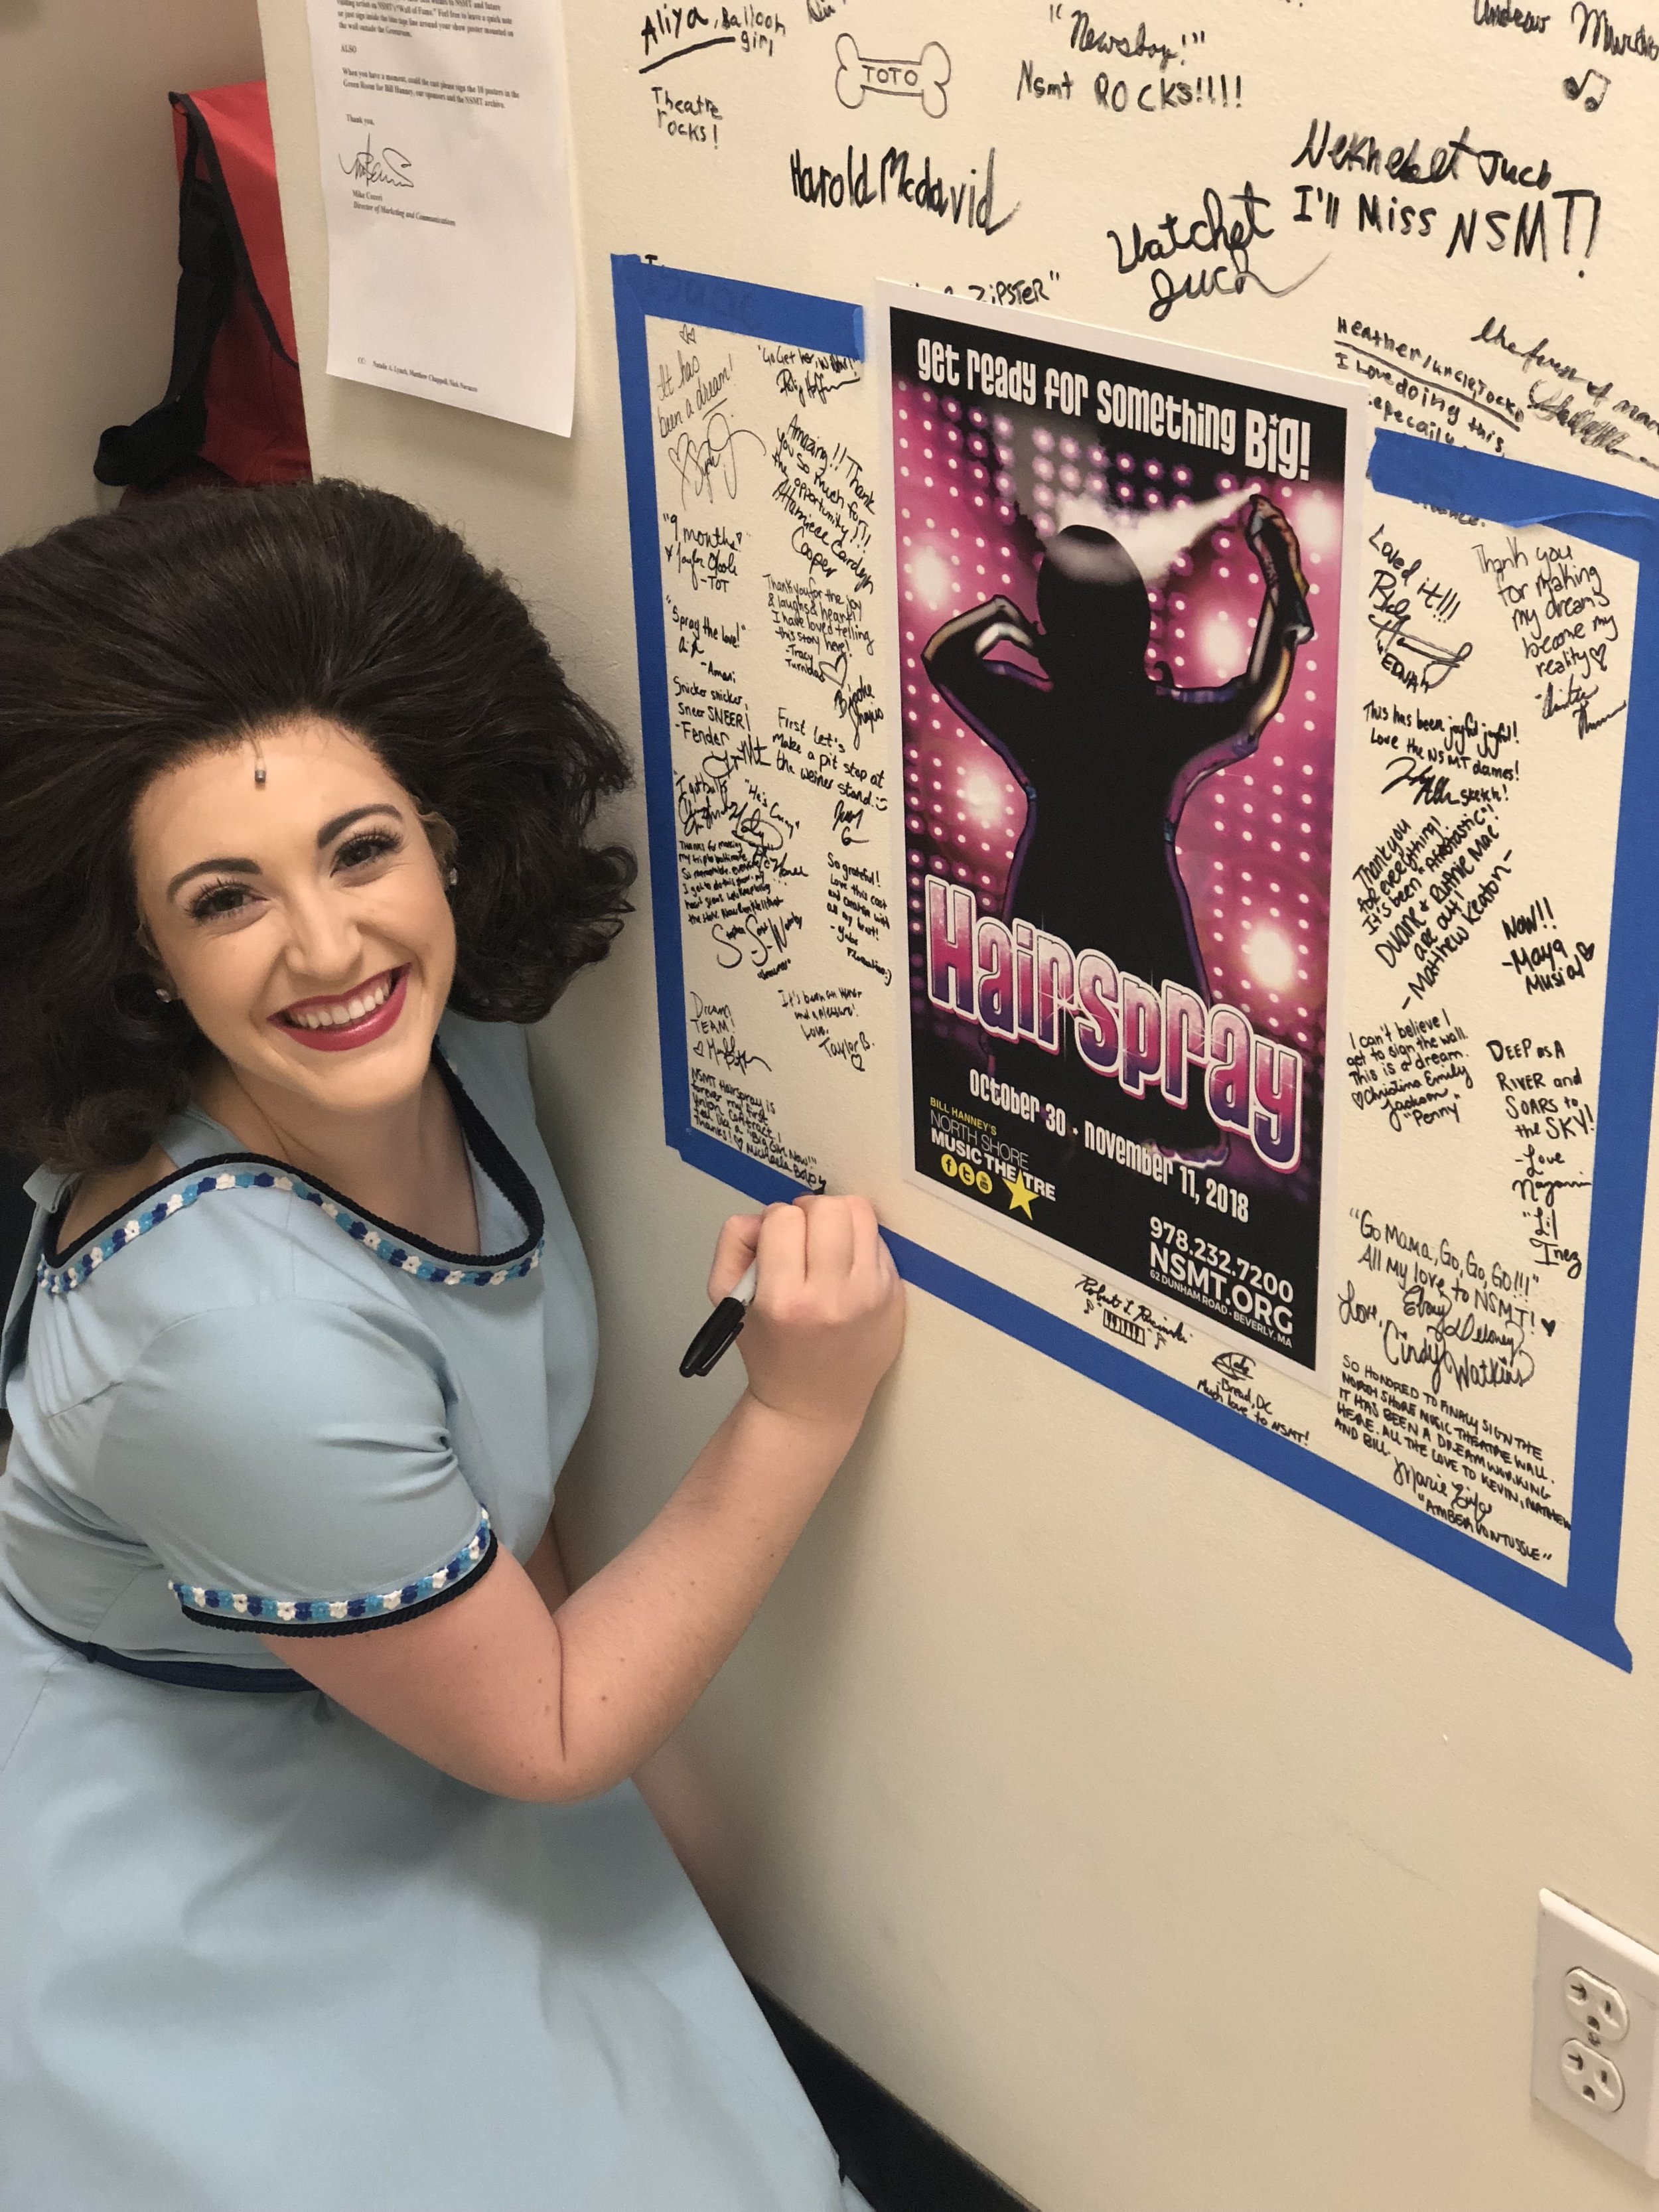  Signing the ICONIC wall backstage at North Shore Music Theatre (Nov 11, 2018) 